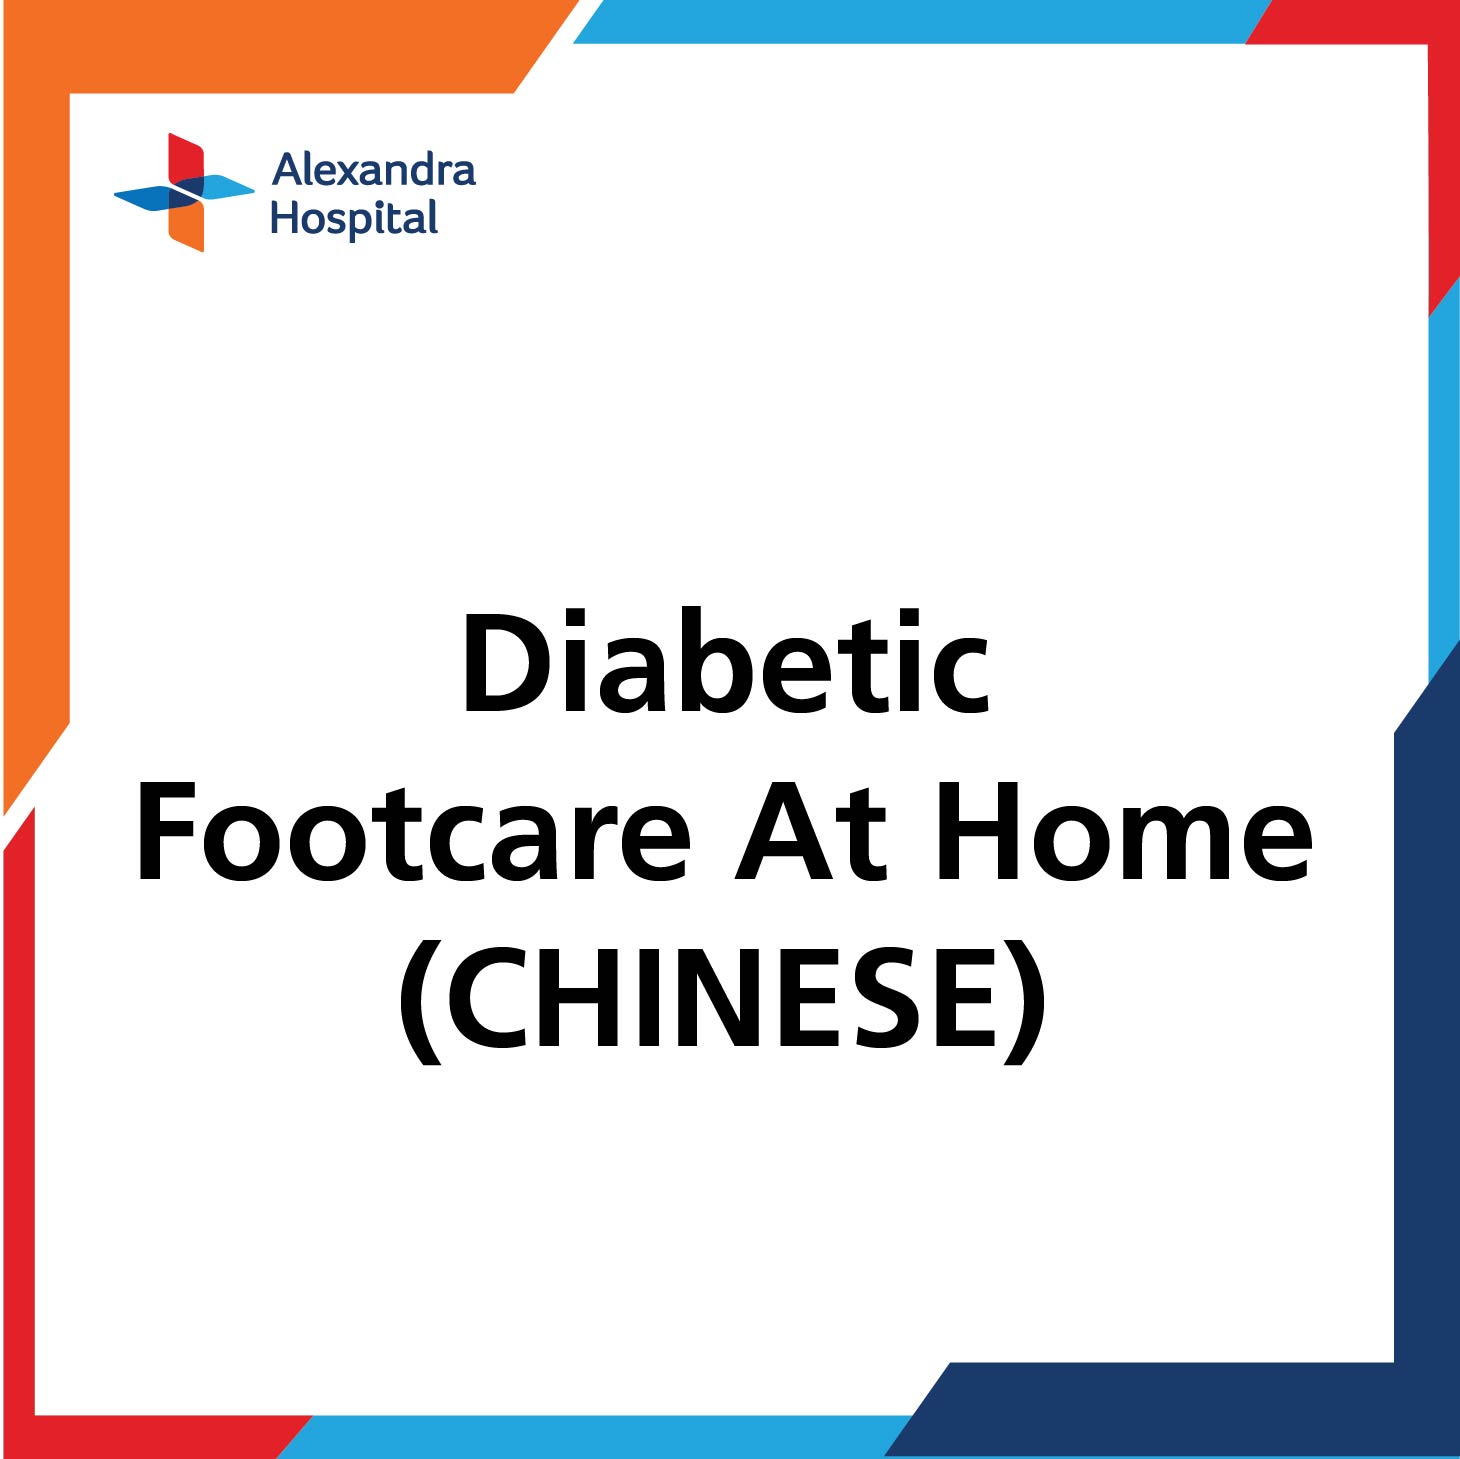 POD - Diabetic Footcare at Home (Chinese)